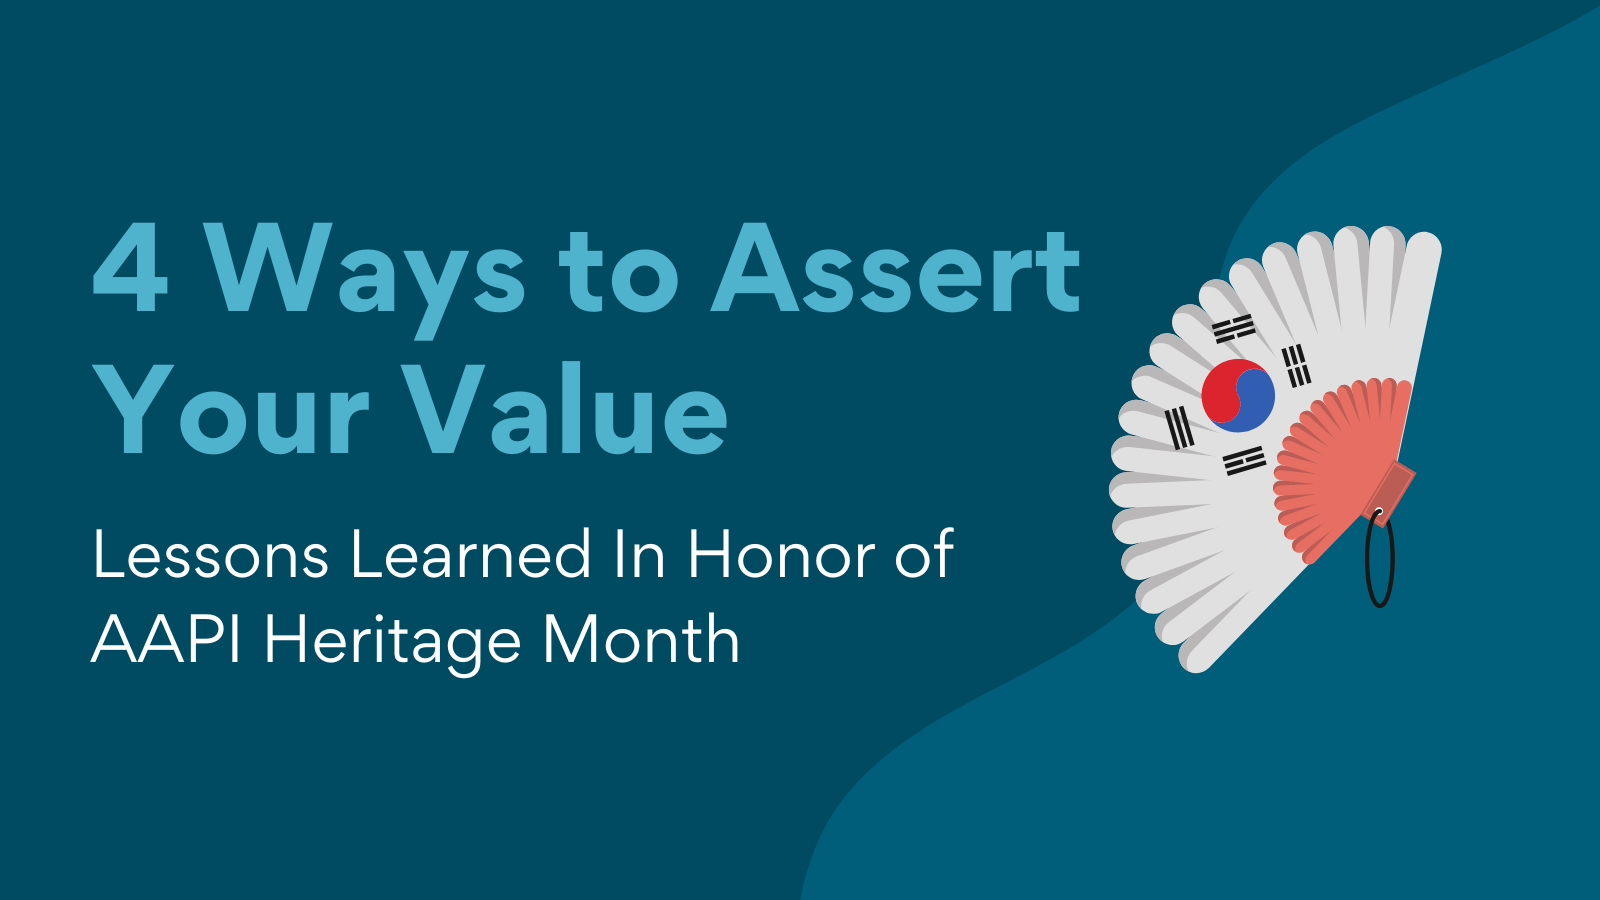 4 Ways to Assert Your Value